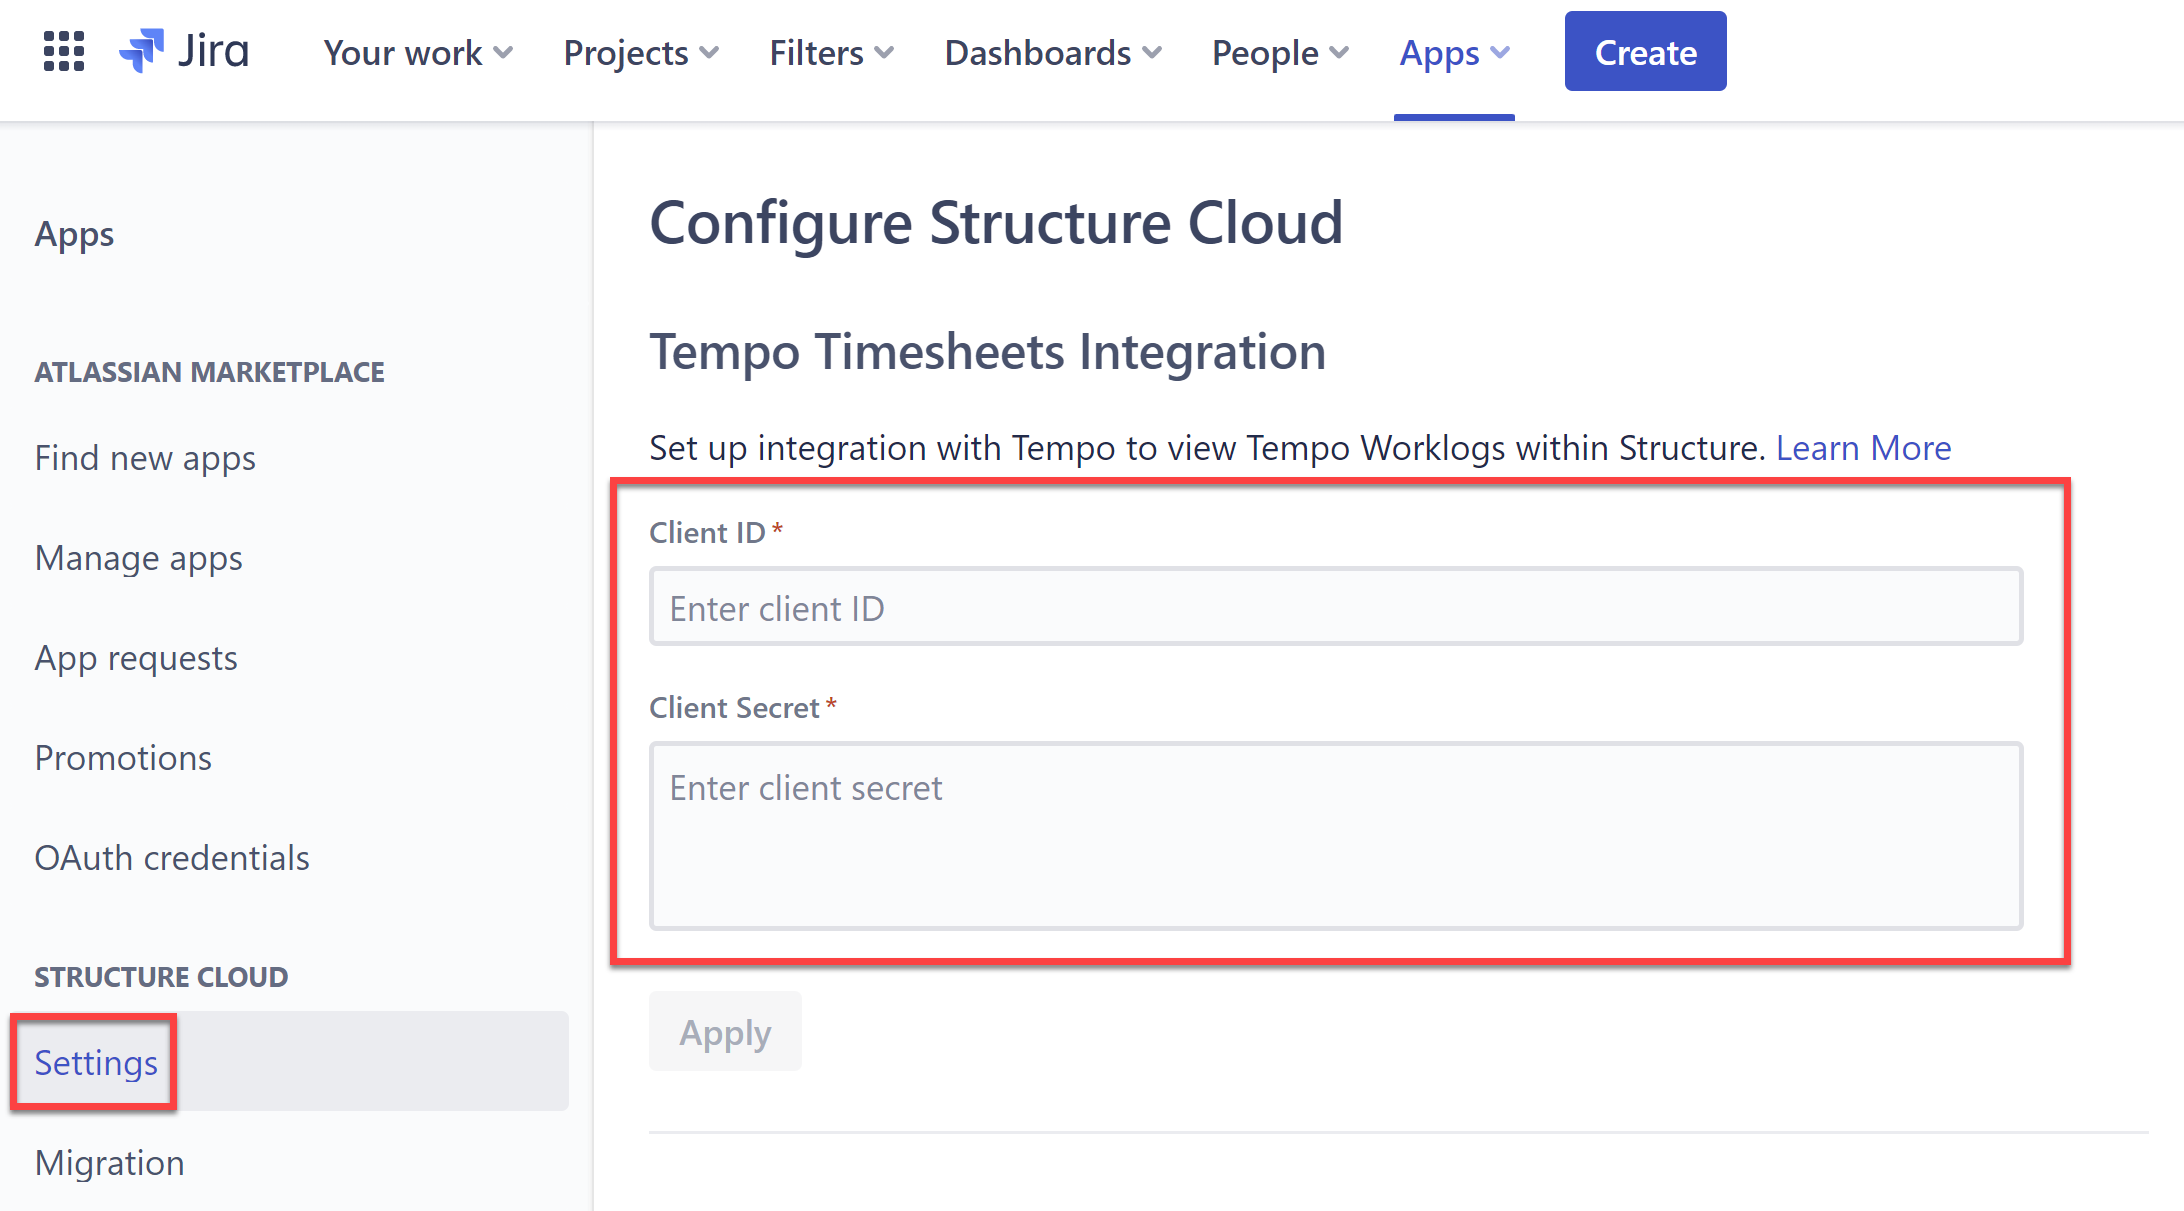 Tempo Timesheets integration with Structure